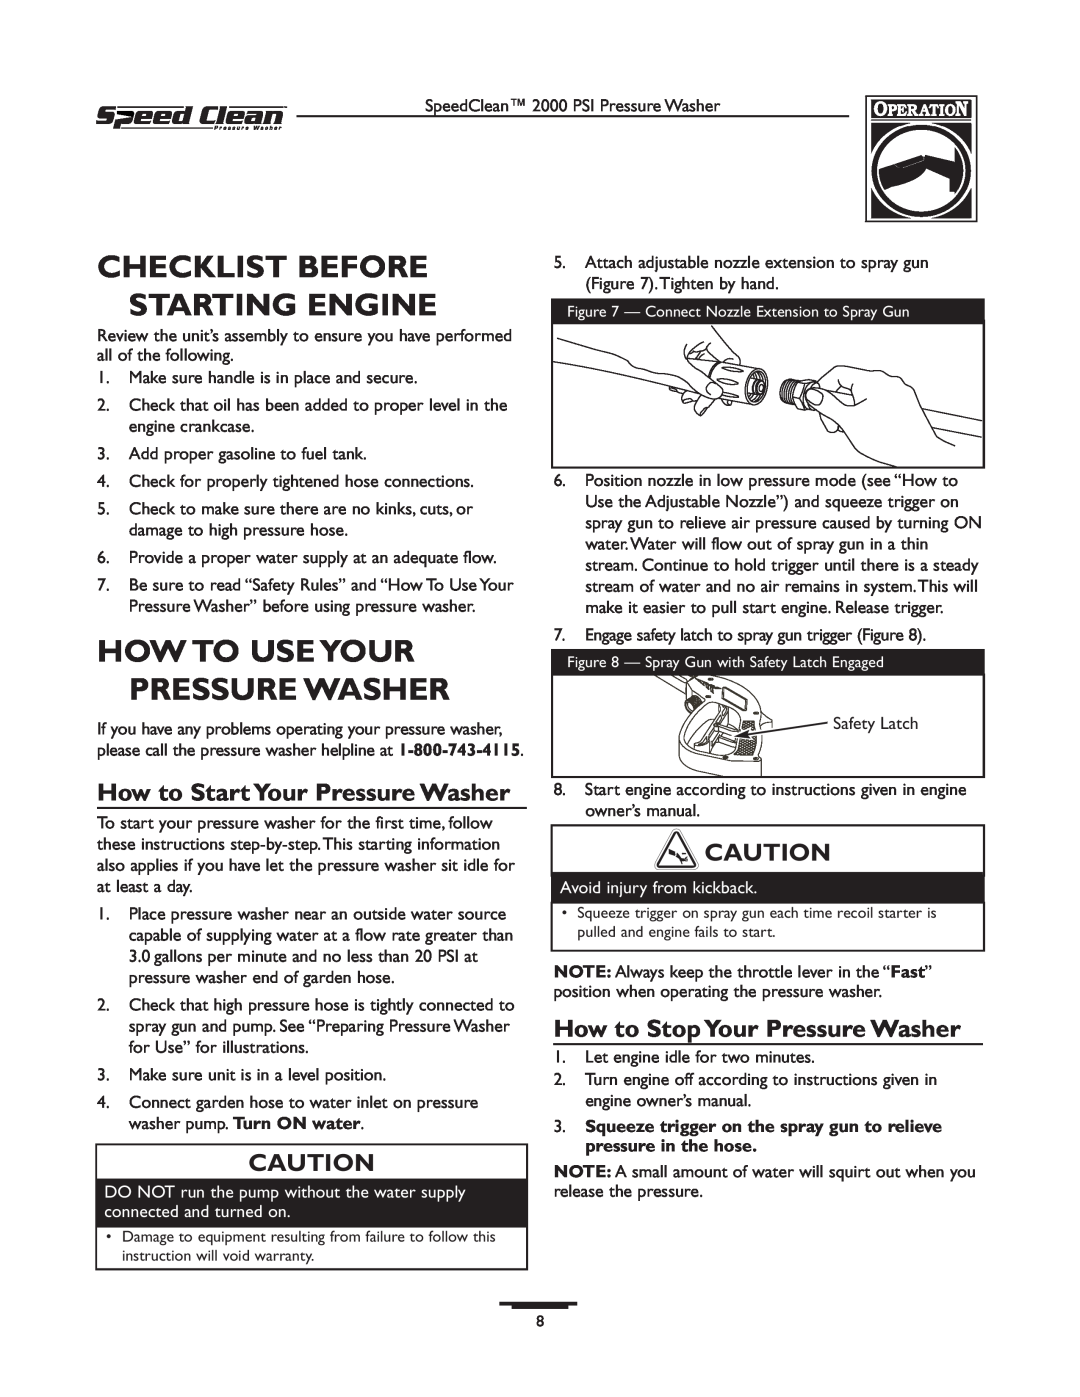 Briggs & Stratton 020211-0 owner manual Checklist Before Starting Engine, How To Use Your Pressure Washer 